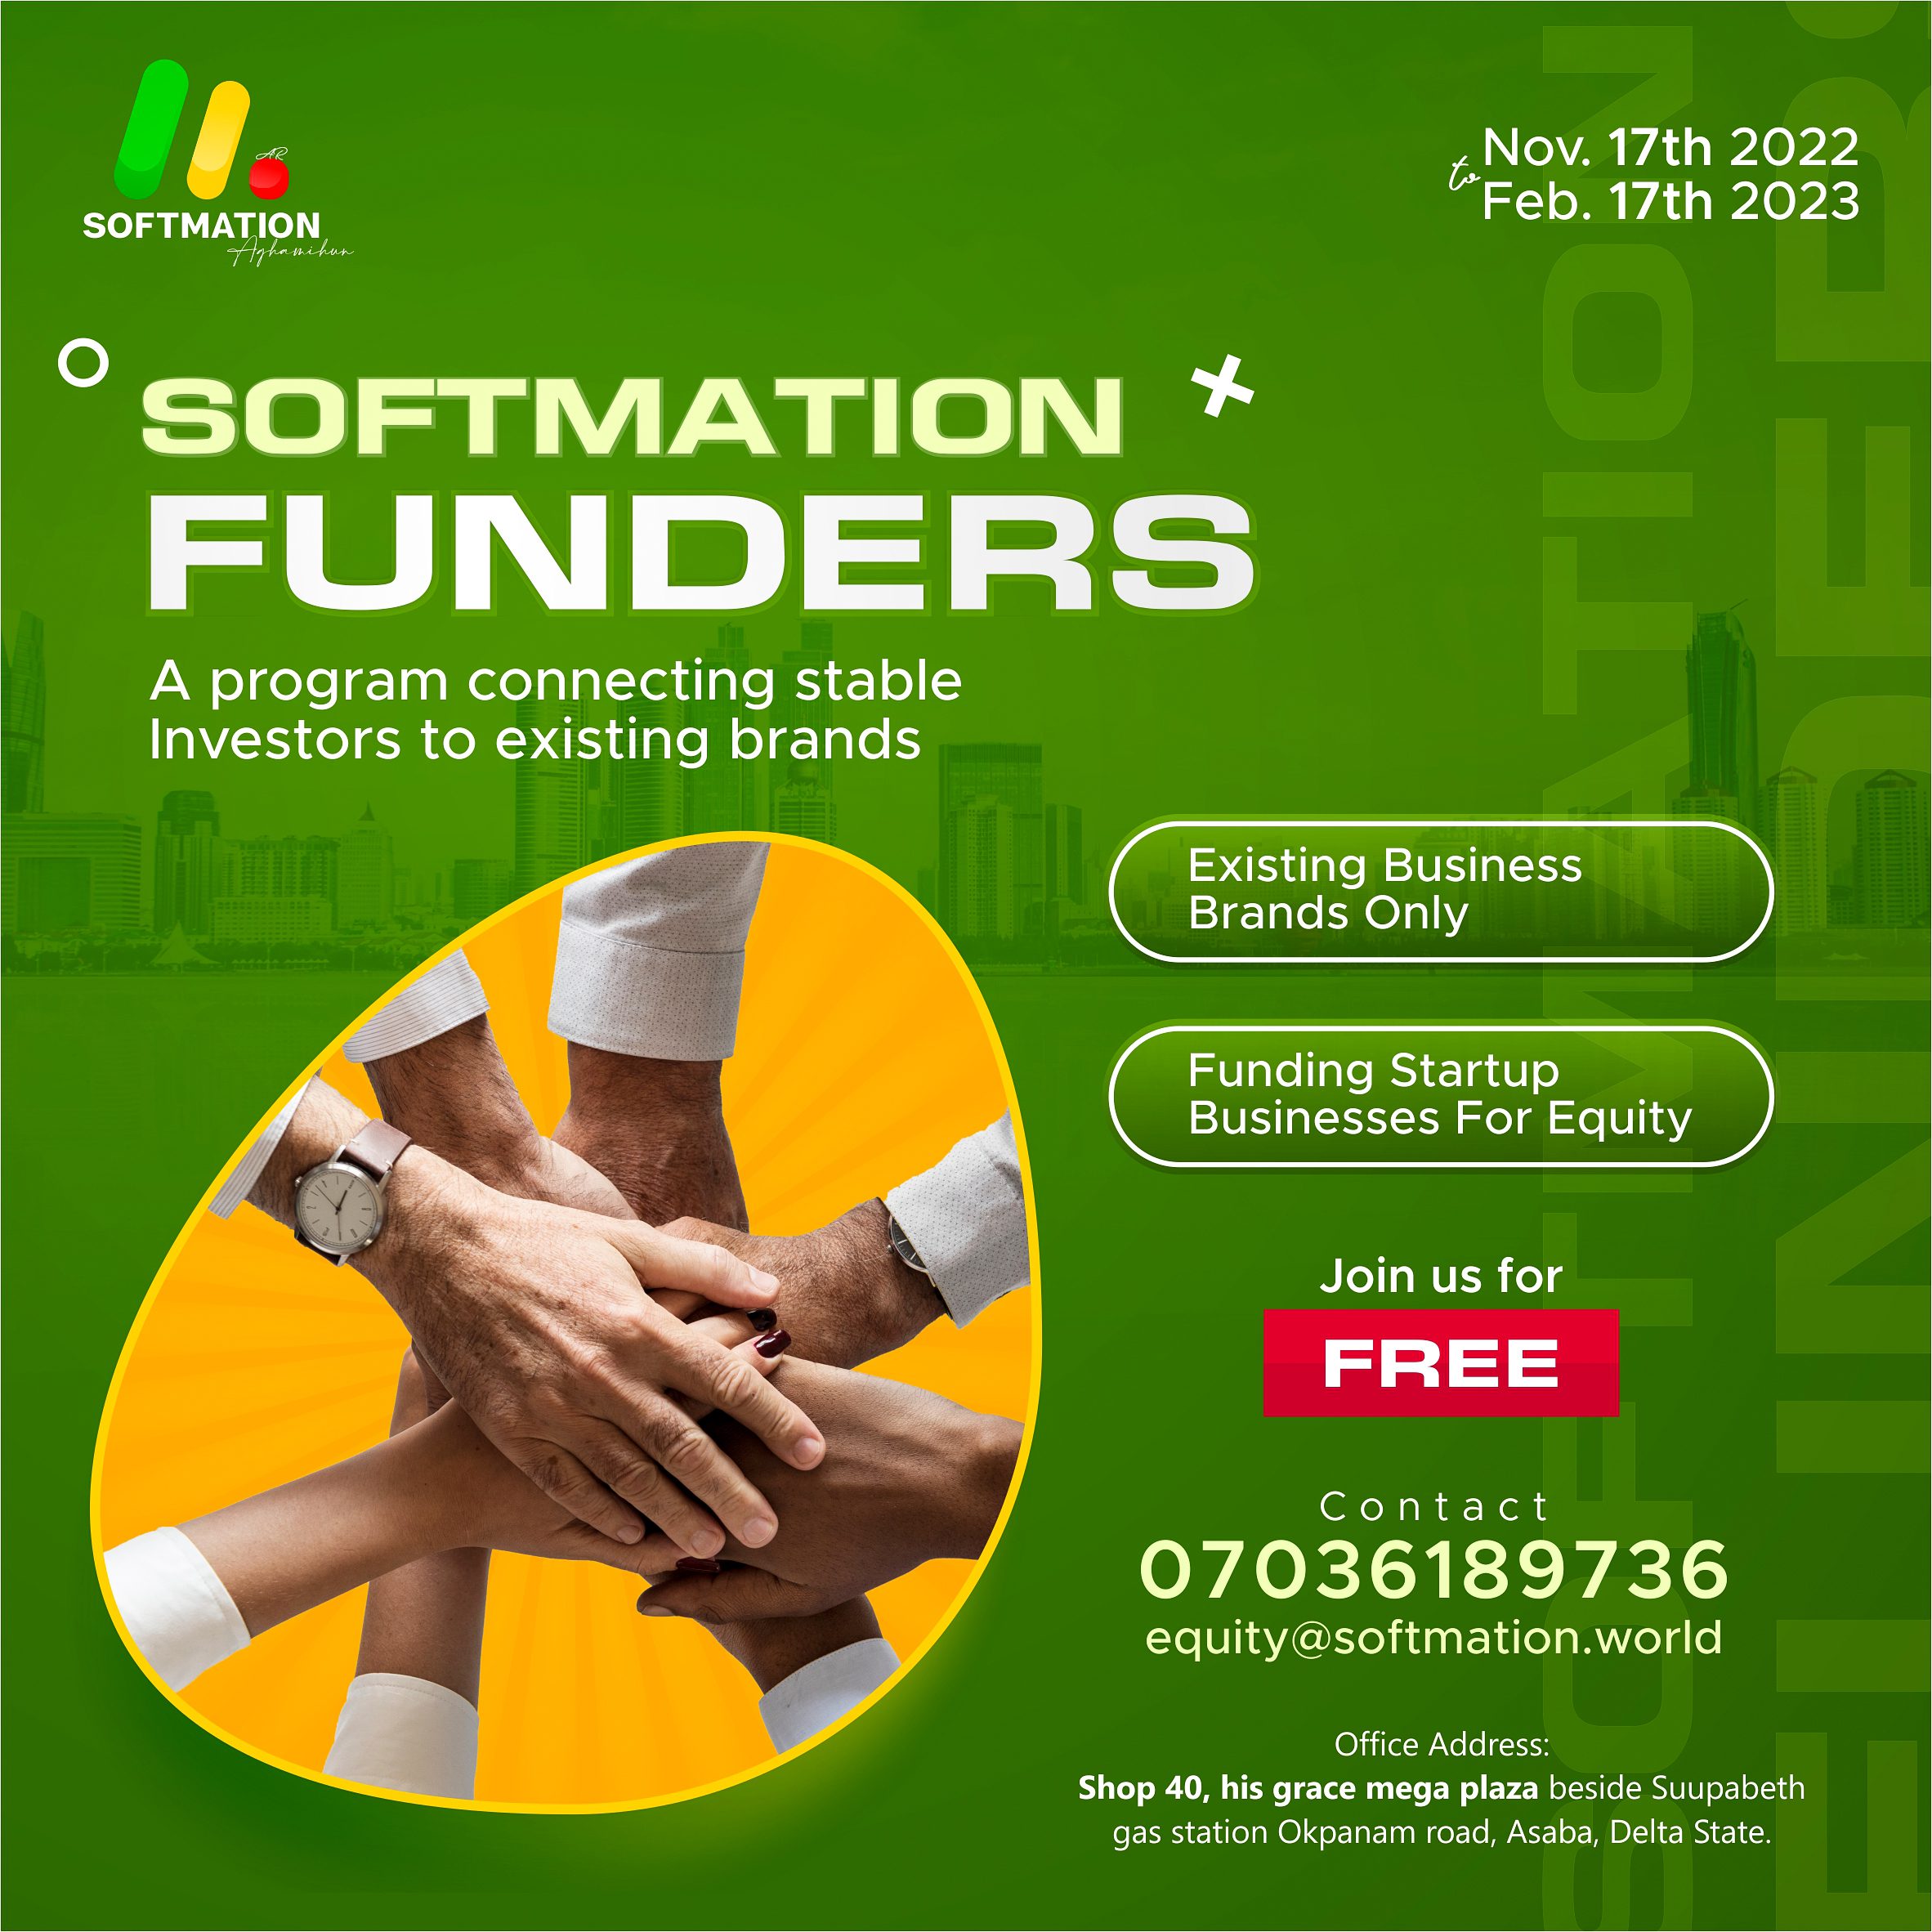 Softmation Funders